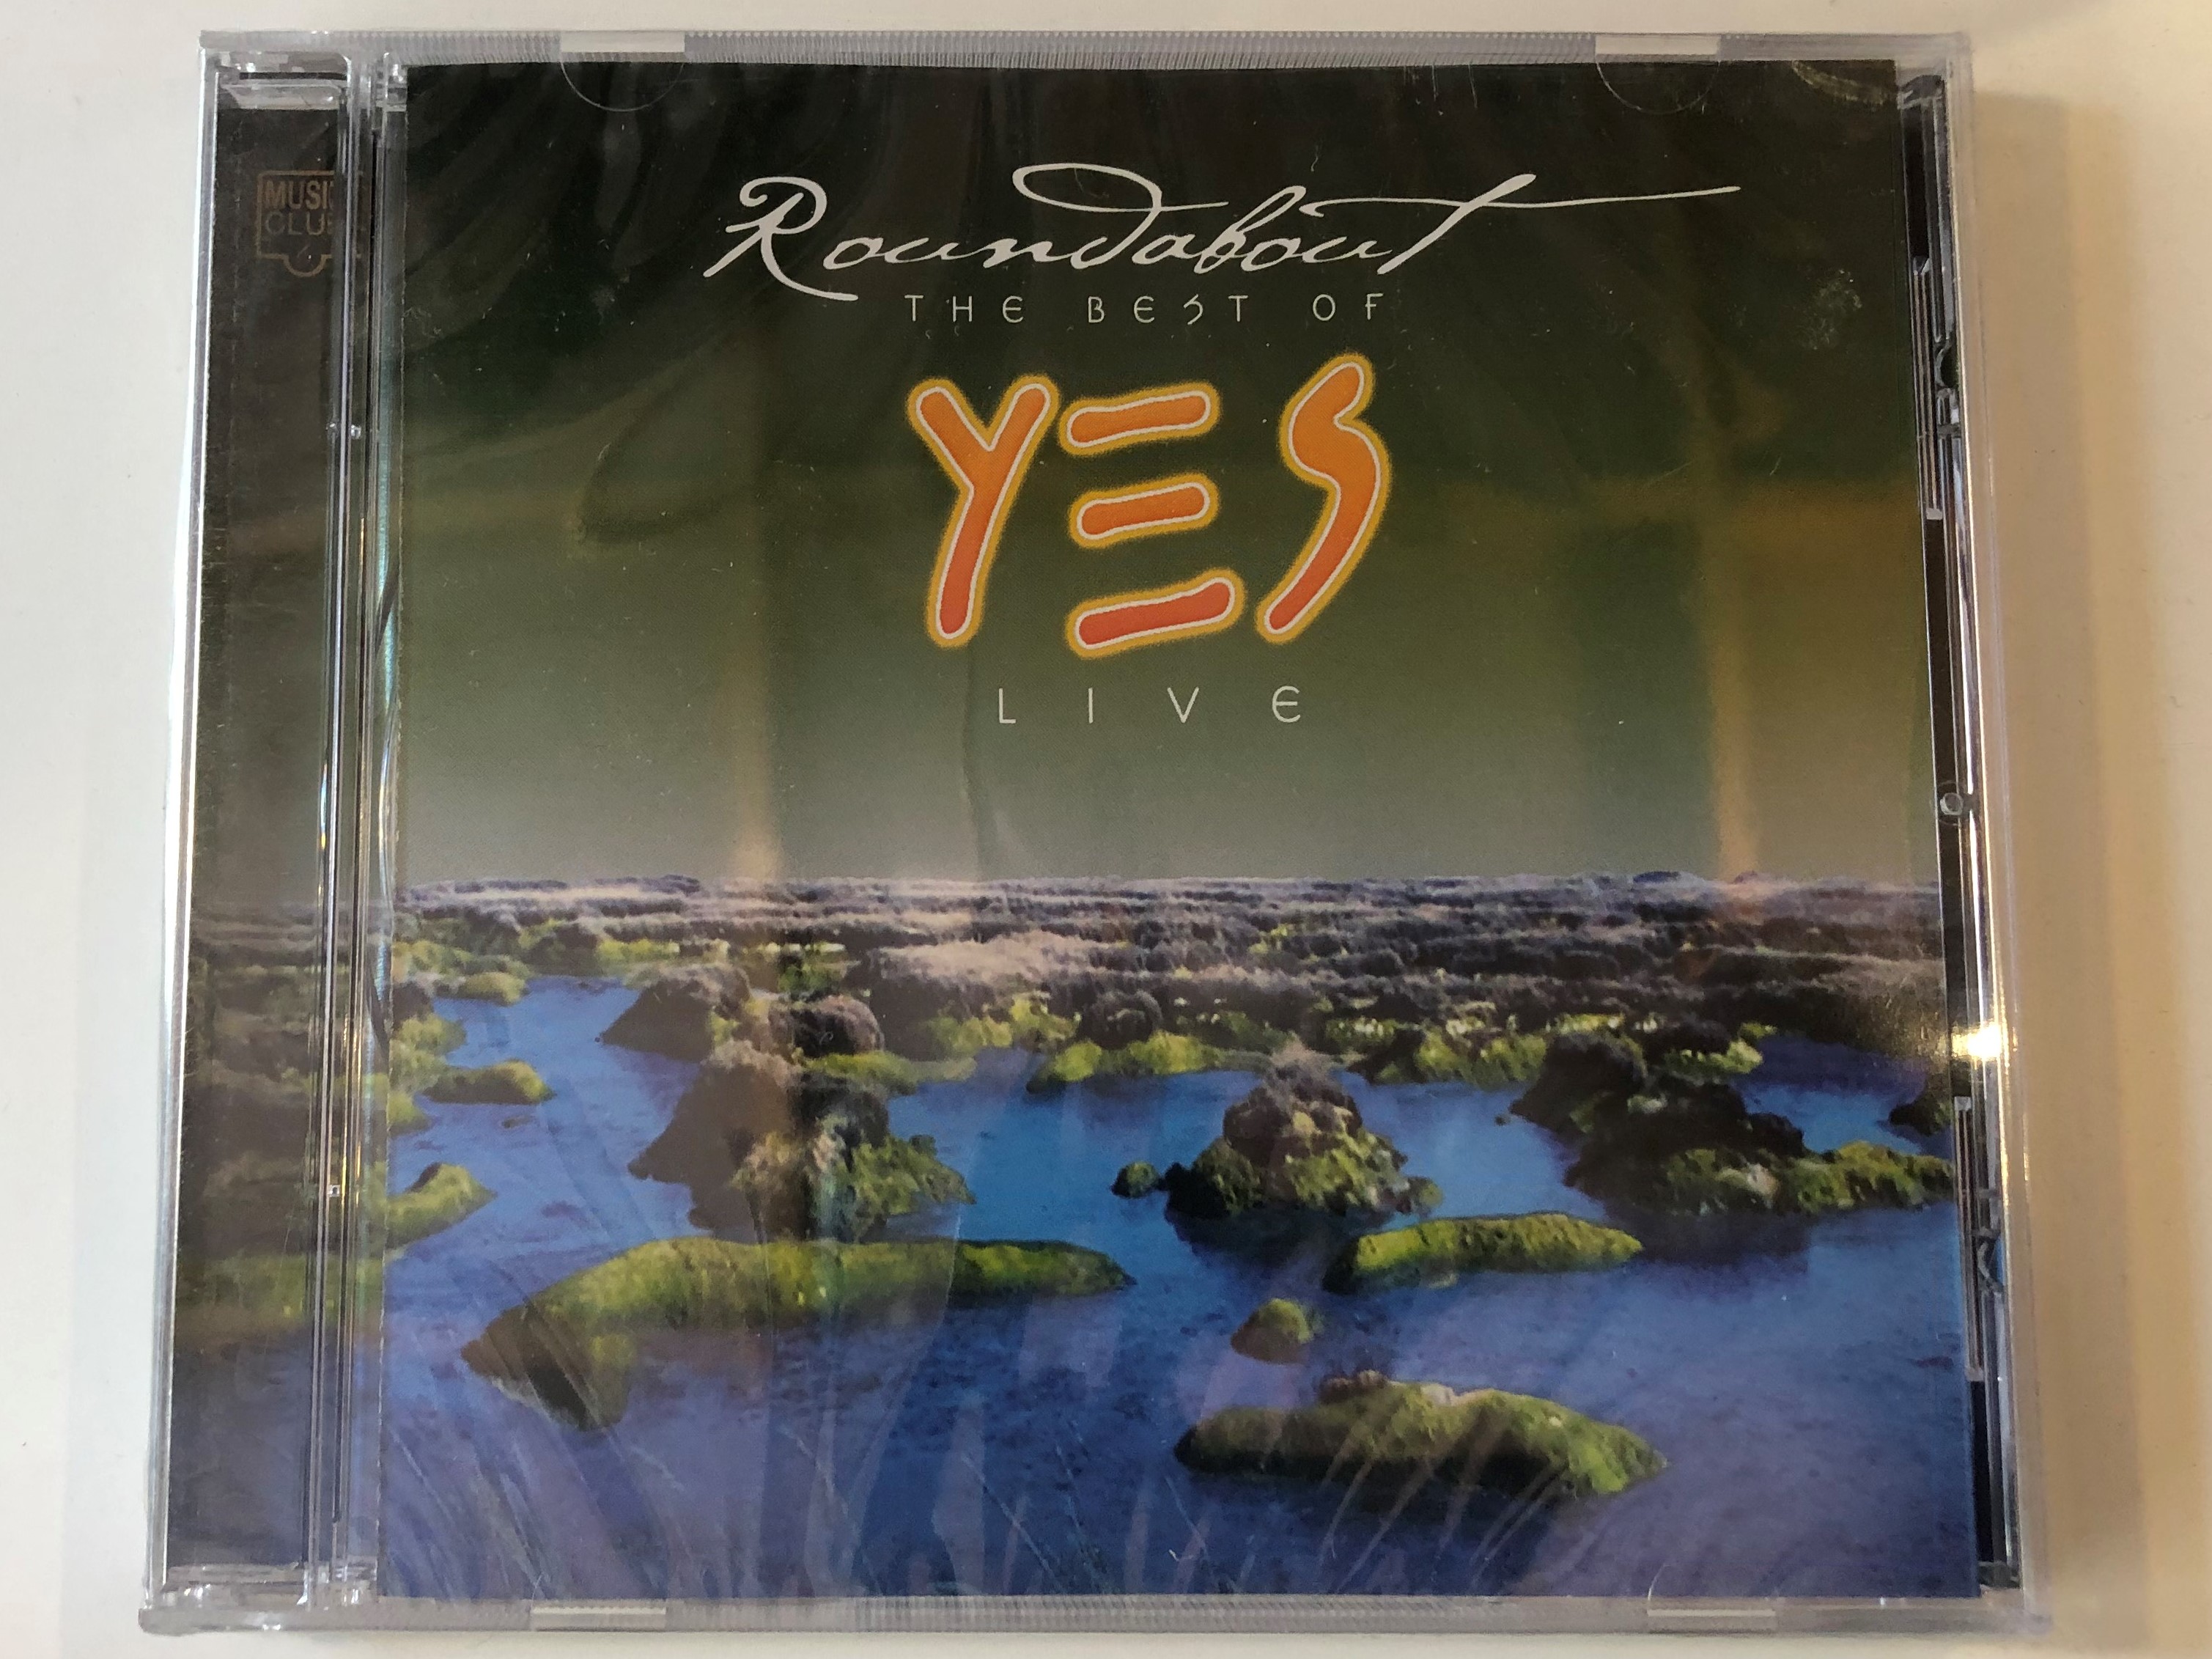 roundabout-the-best-of-yes-live-music-club-audio-cd-2003-mccd-524-1-.jpg